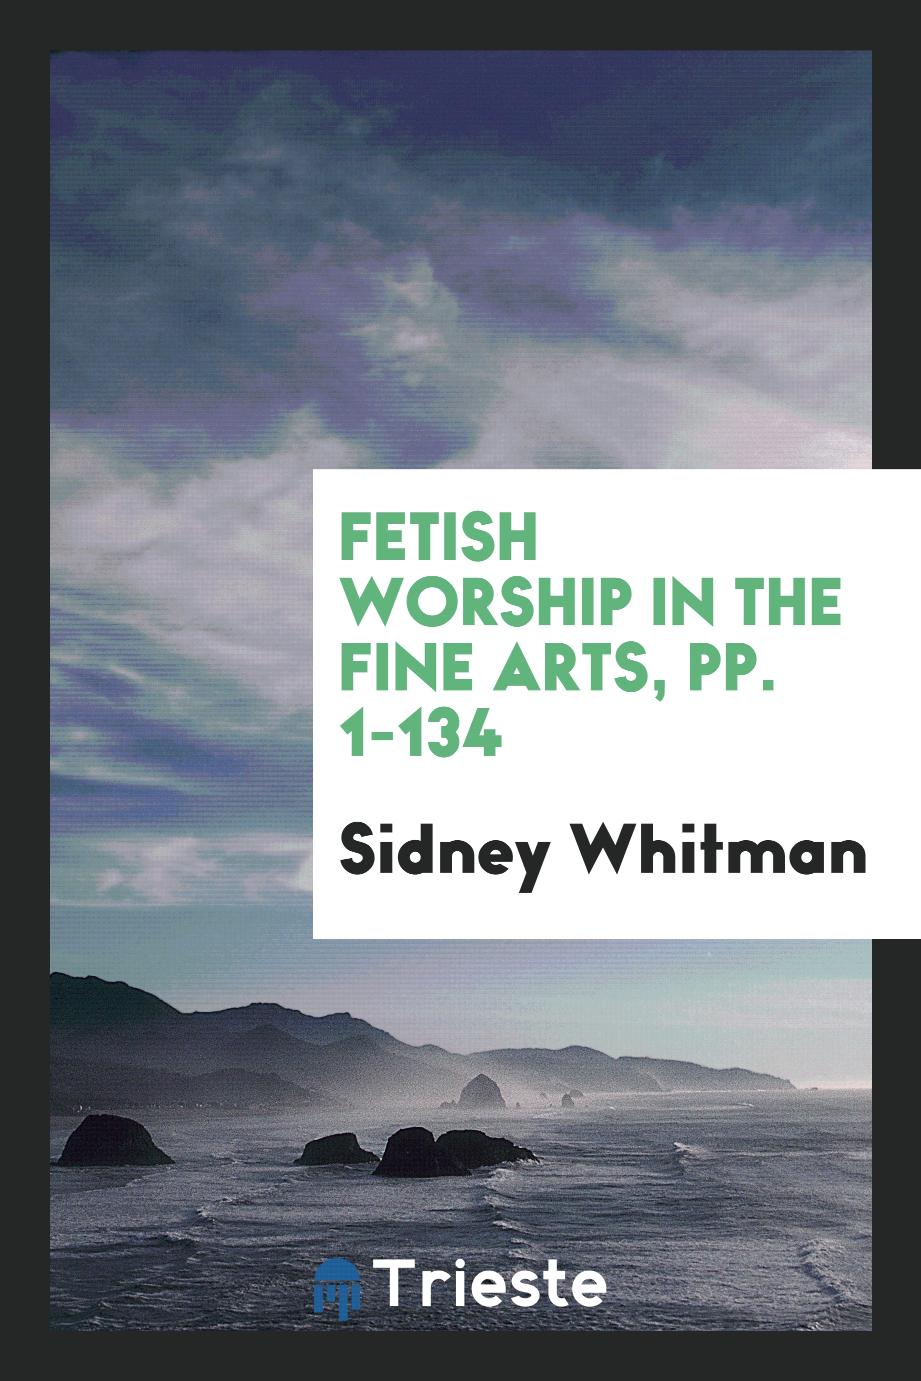 Fetish Worship in the Fine Arts, pp. 1-134